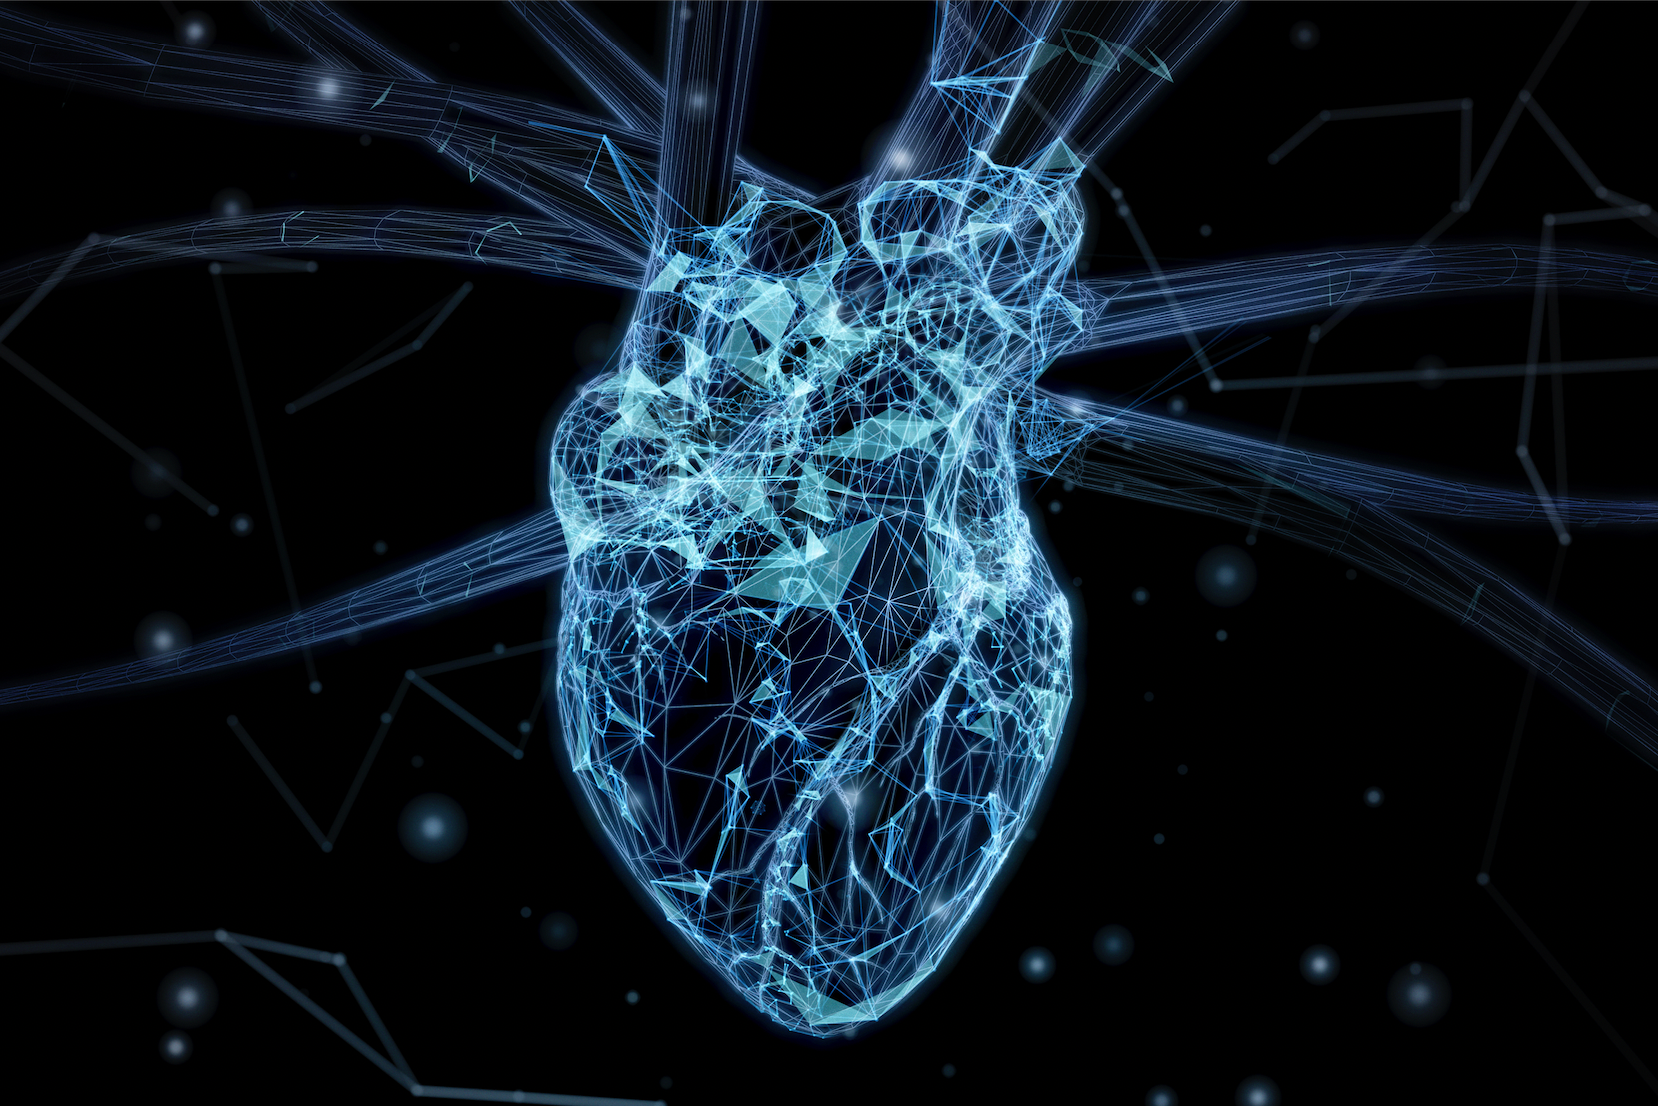 BLOG: The Power of Enterprise Imaging in Structural Heart Procedures